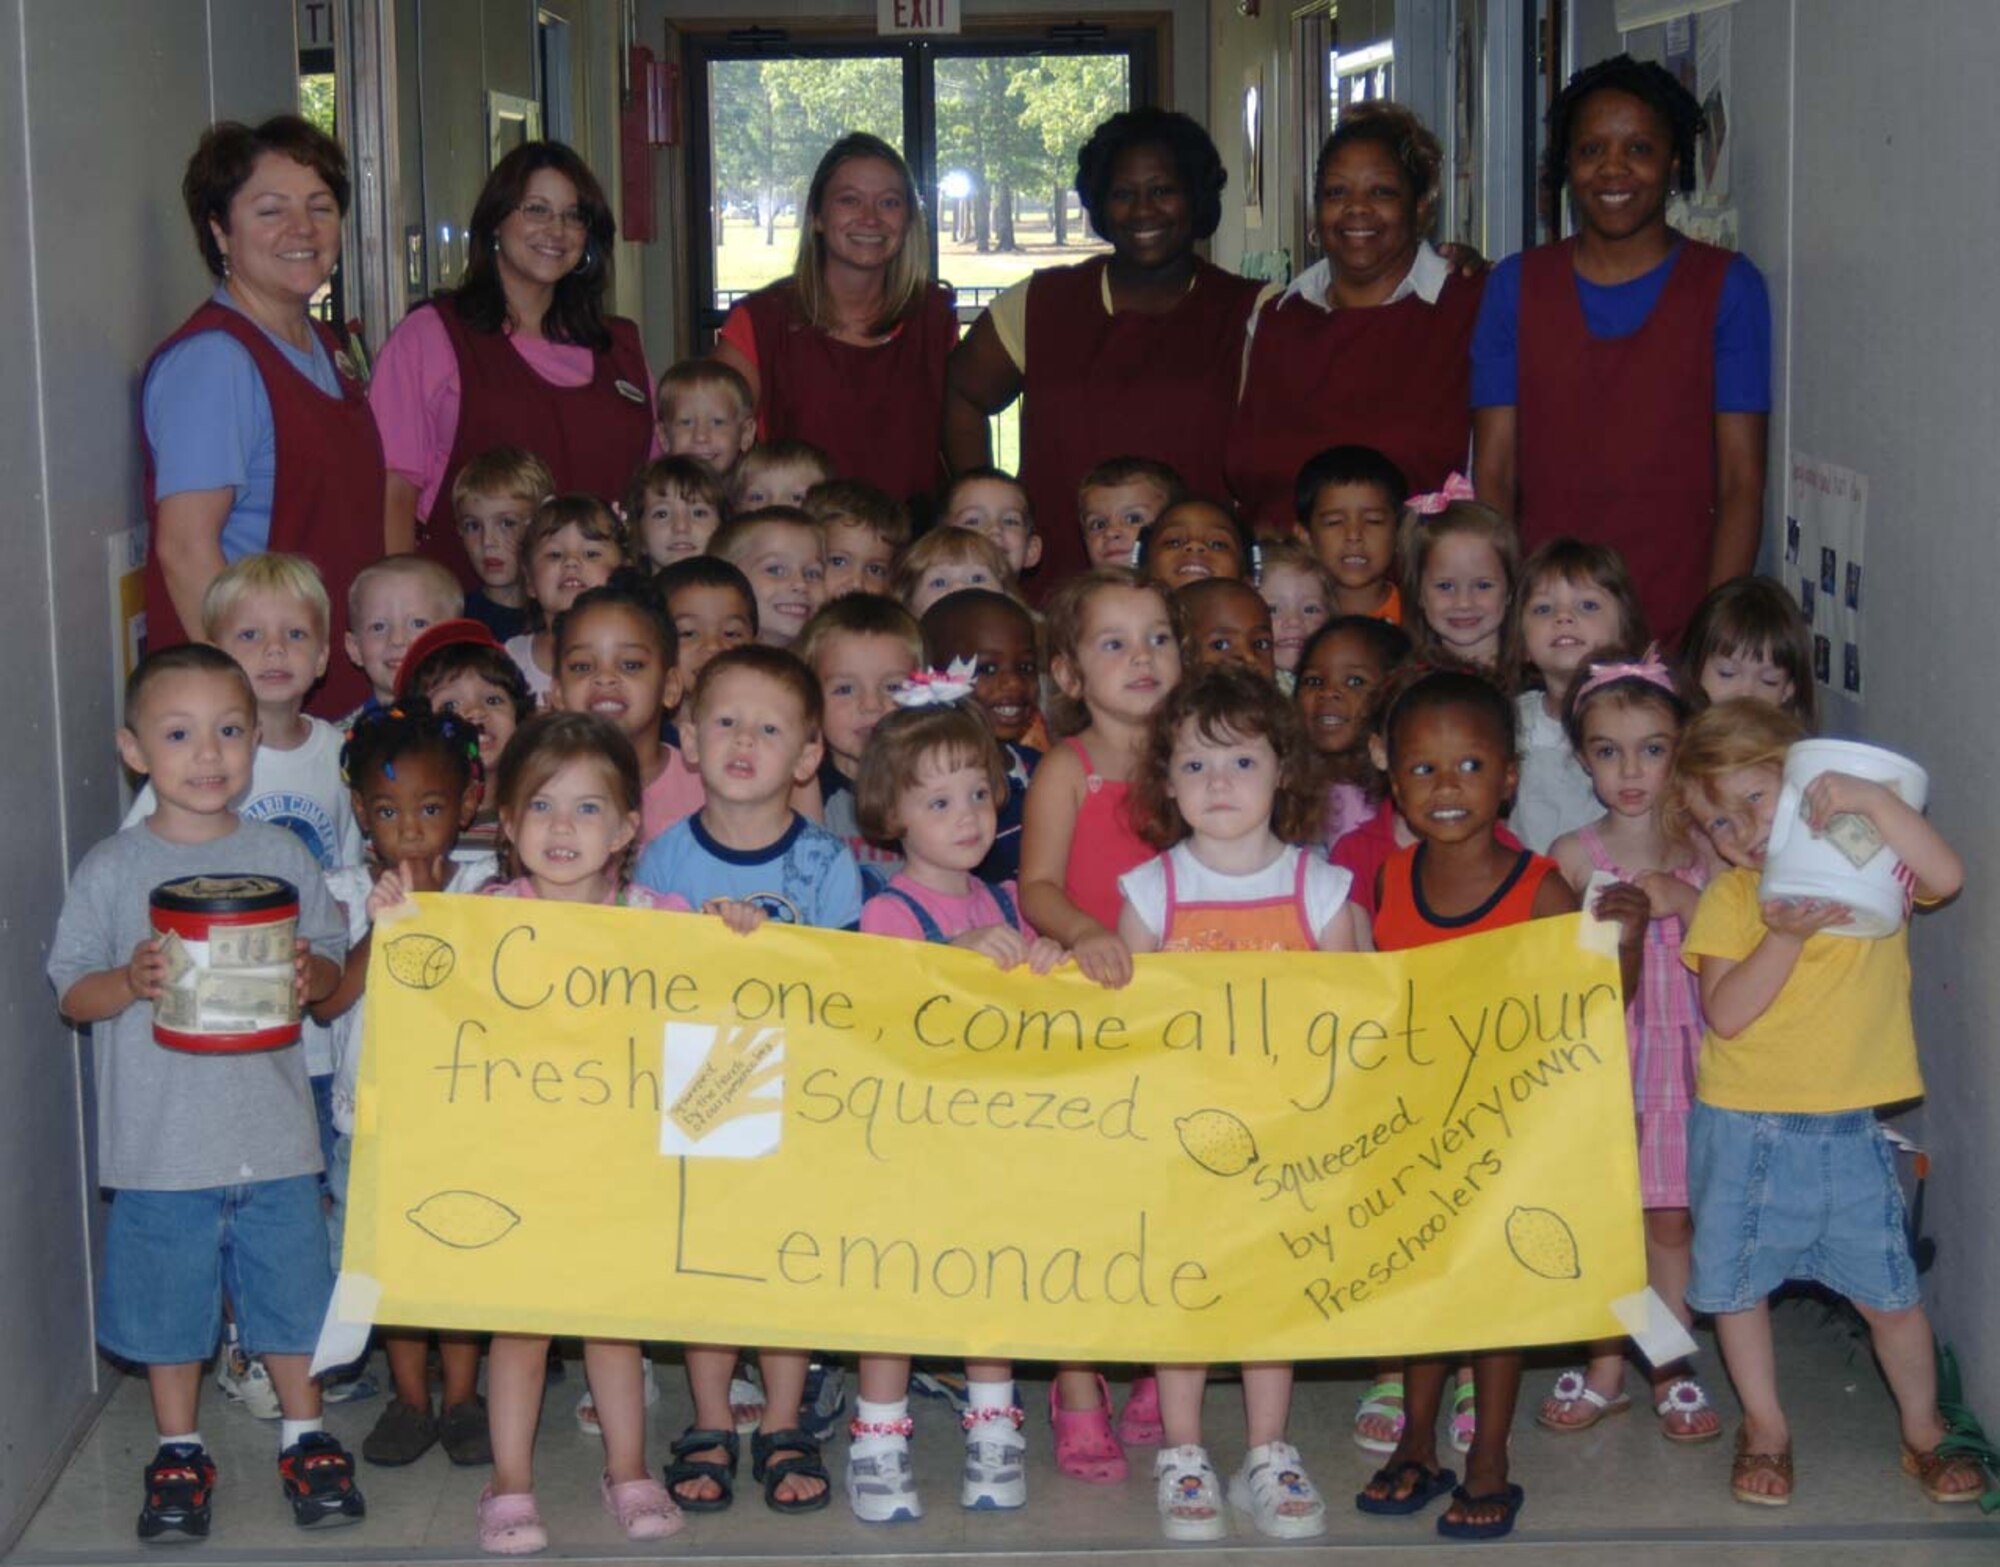 The children in Preschool classes 1, 2 and 3 made lemonade to raise money to send phone cards to deployed troops to be able to call home. (U.S. Air Force photo by Airman 1st Class Danielle Powell)